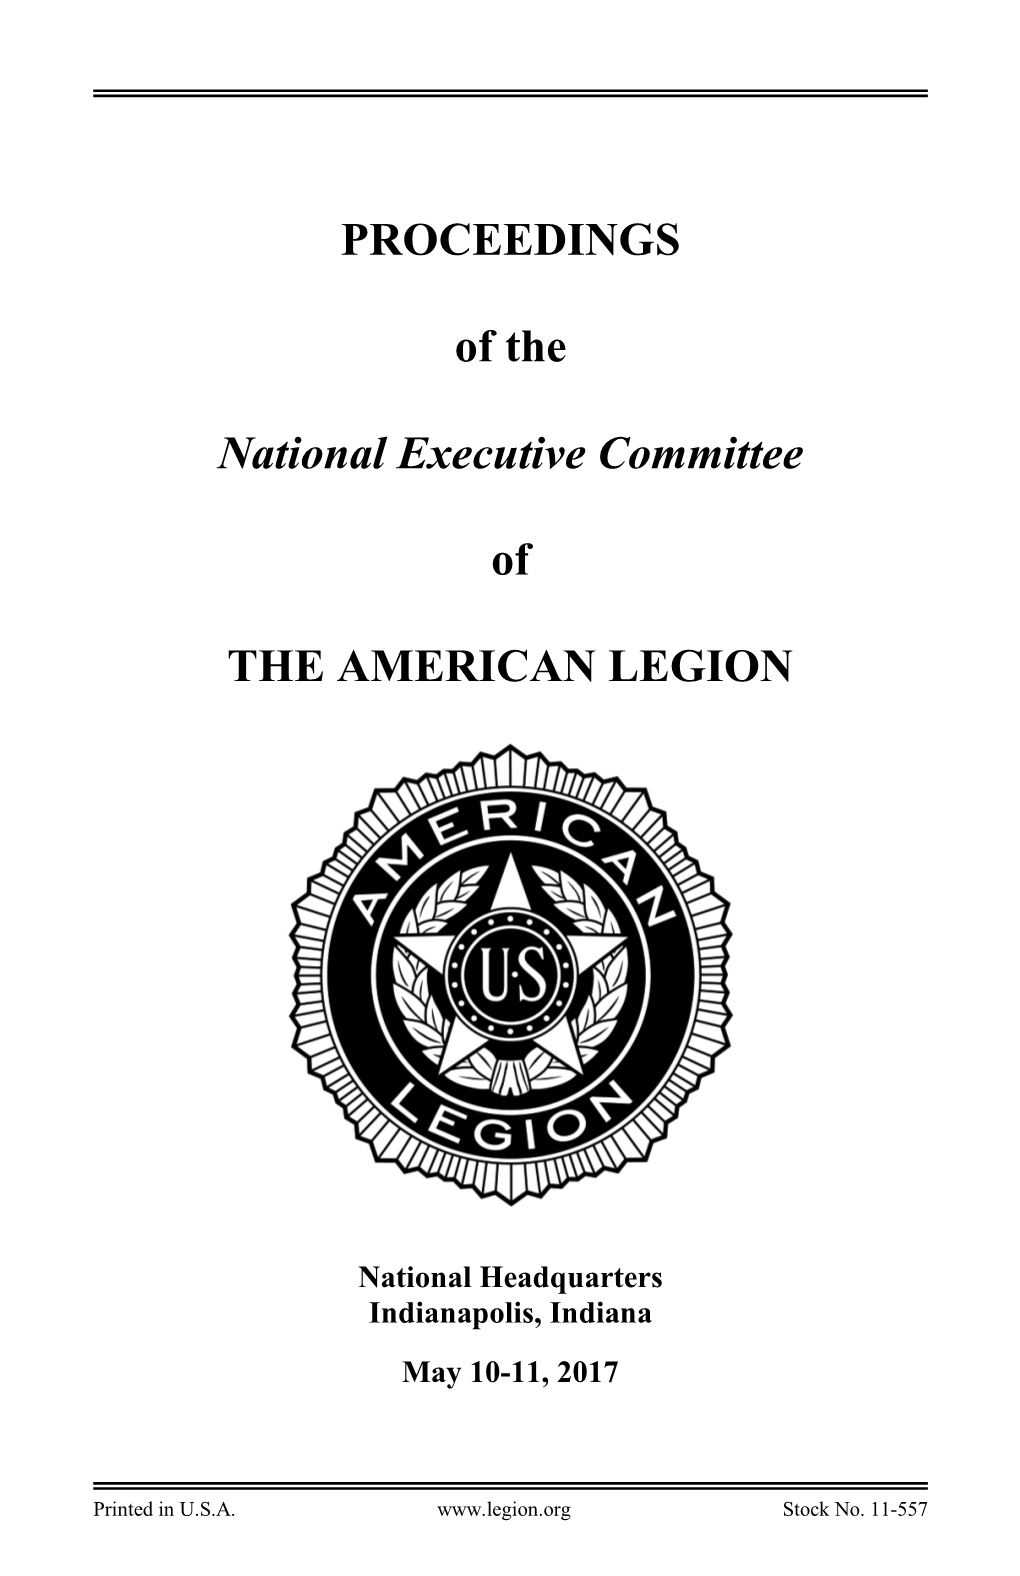 PROCEEDINGS of the National Executive Committee of THE